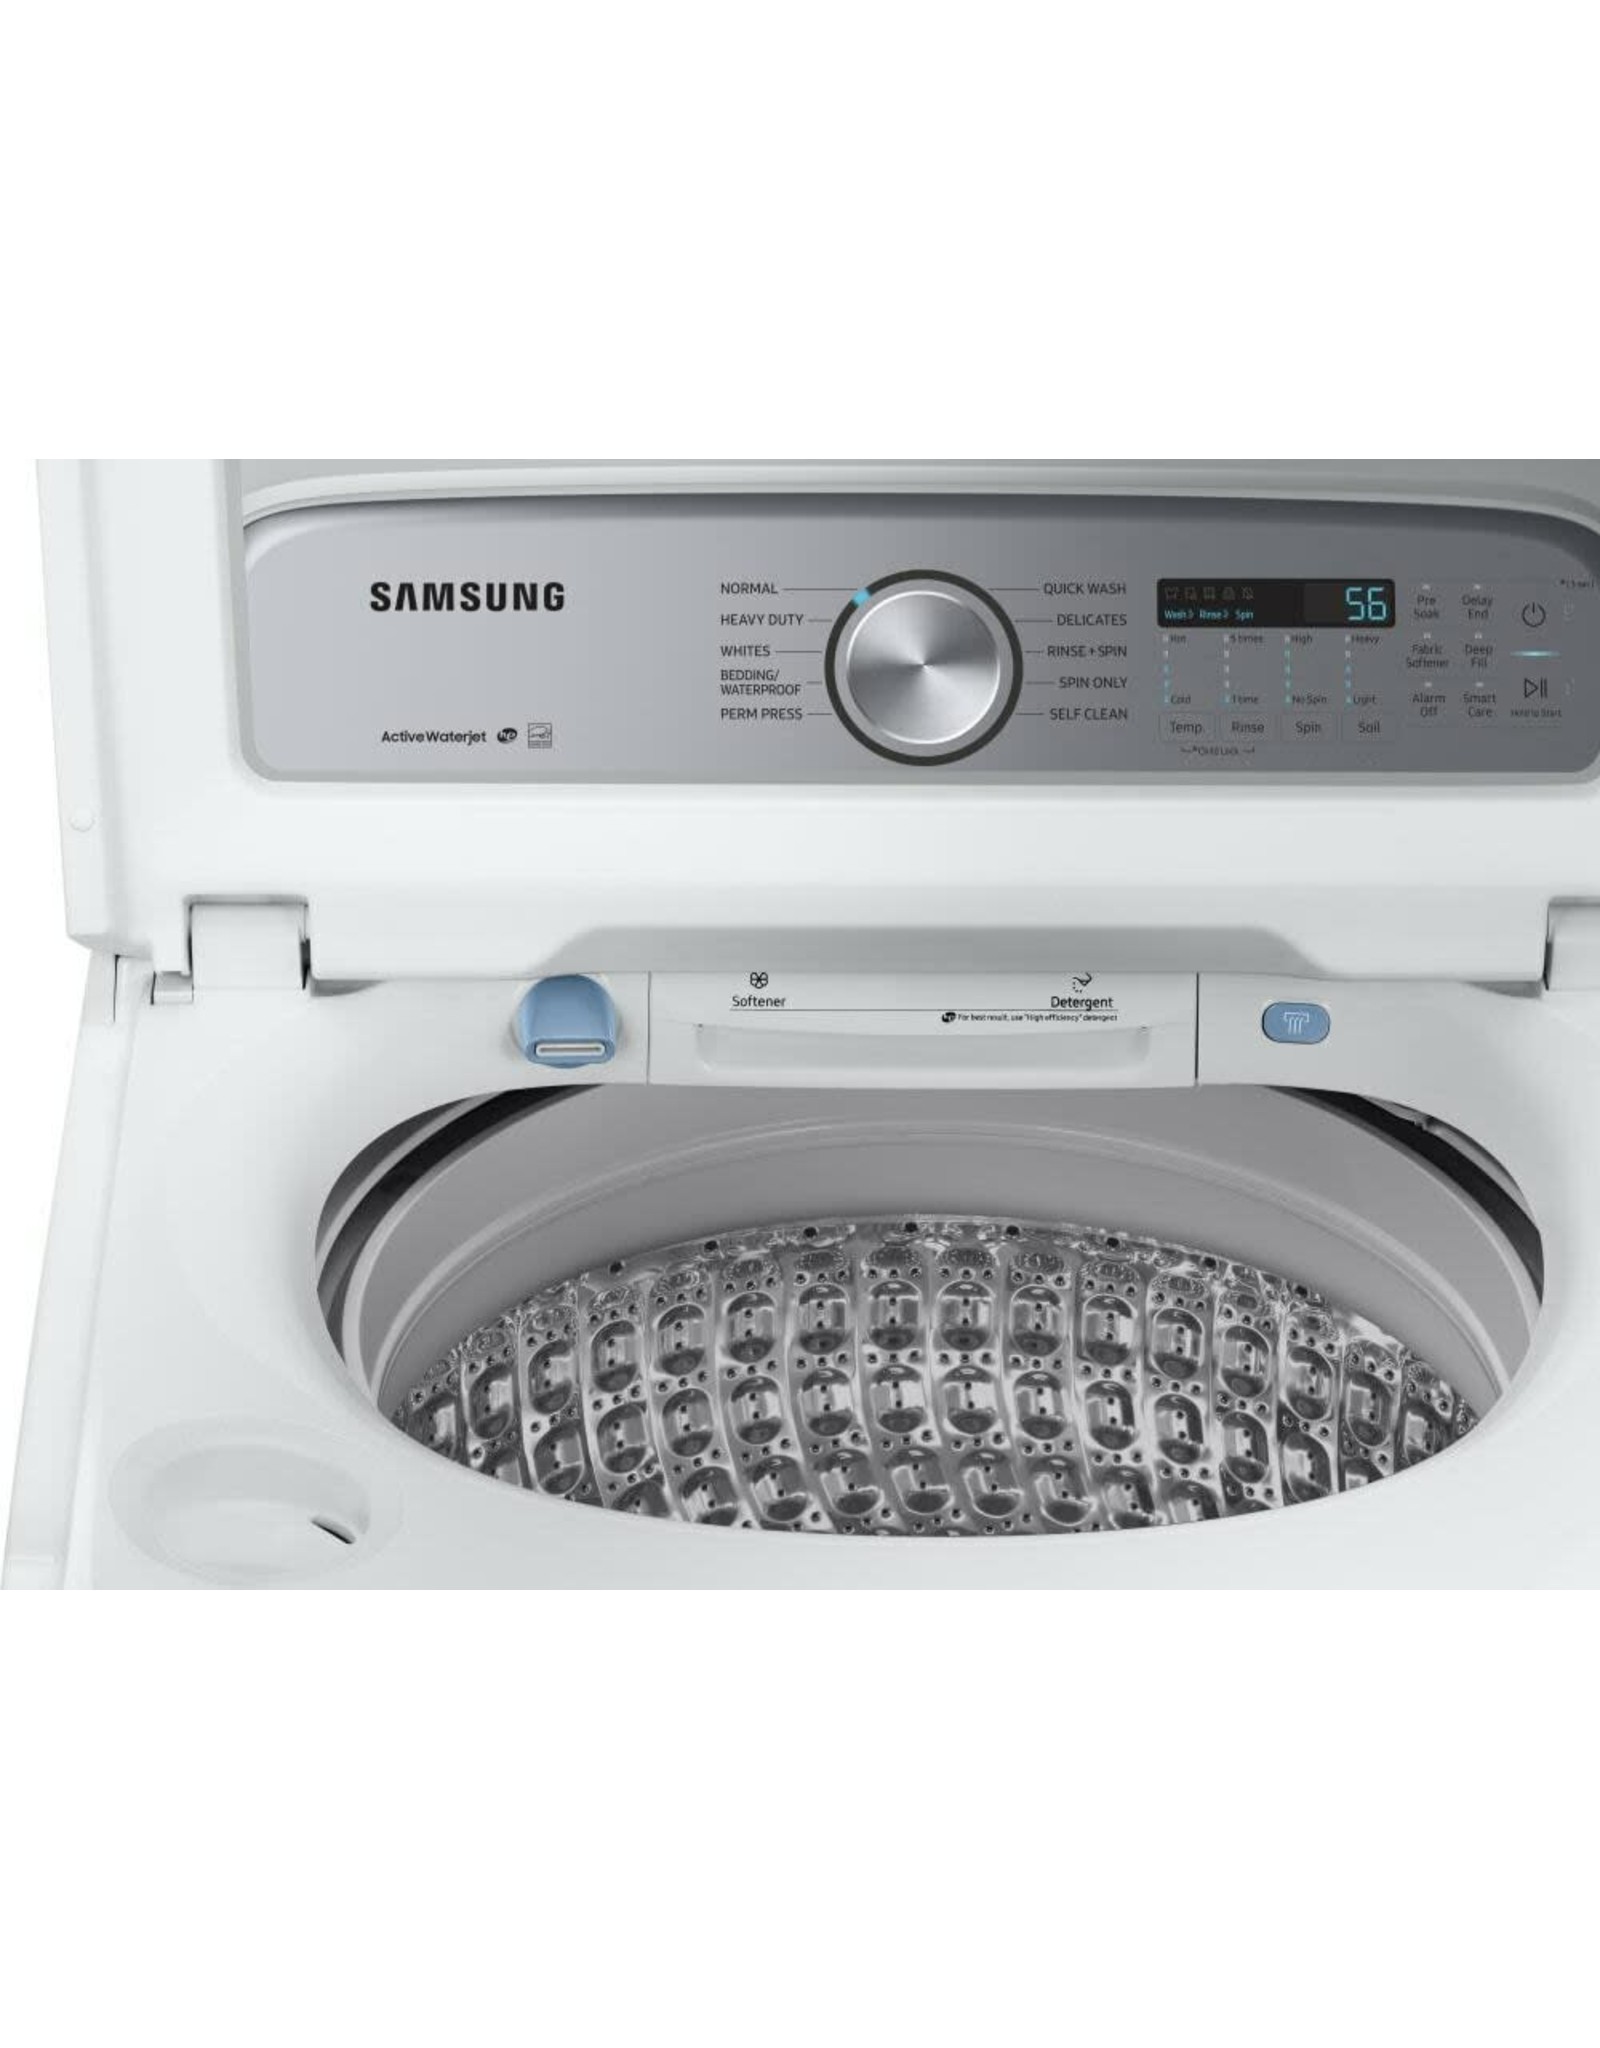 SAMSUNG C/R WA50R5200AW 5.0 cu. ft. Hi-Efficiency White Top Load Washing Machine with Active Water Jet, ENERGY STAR